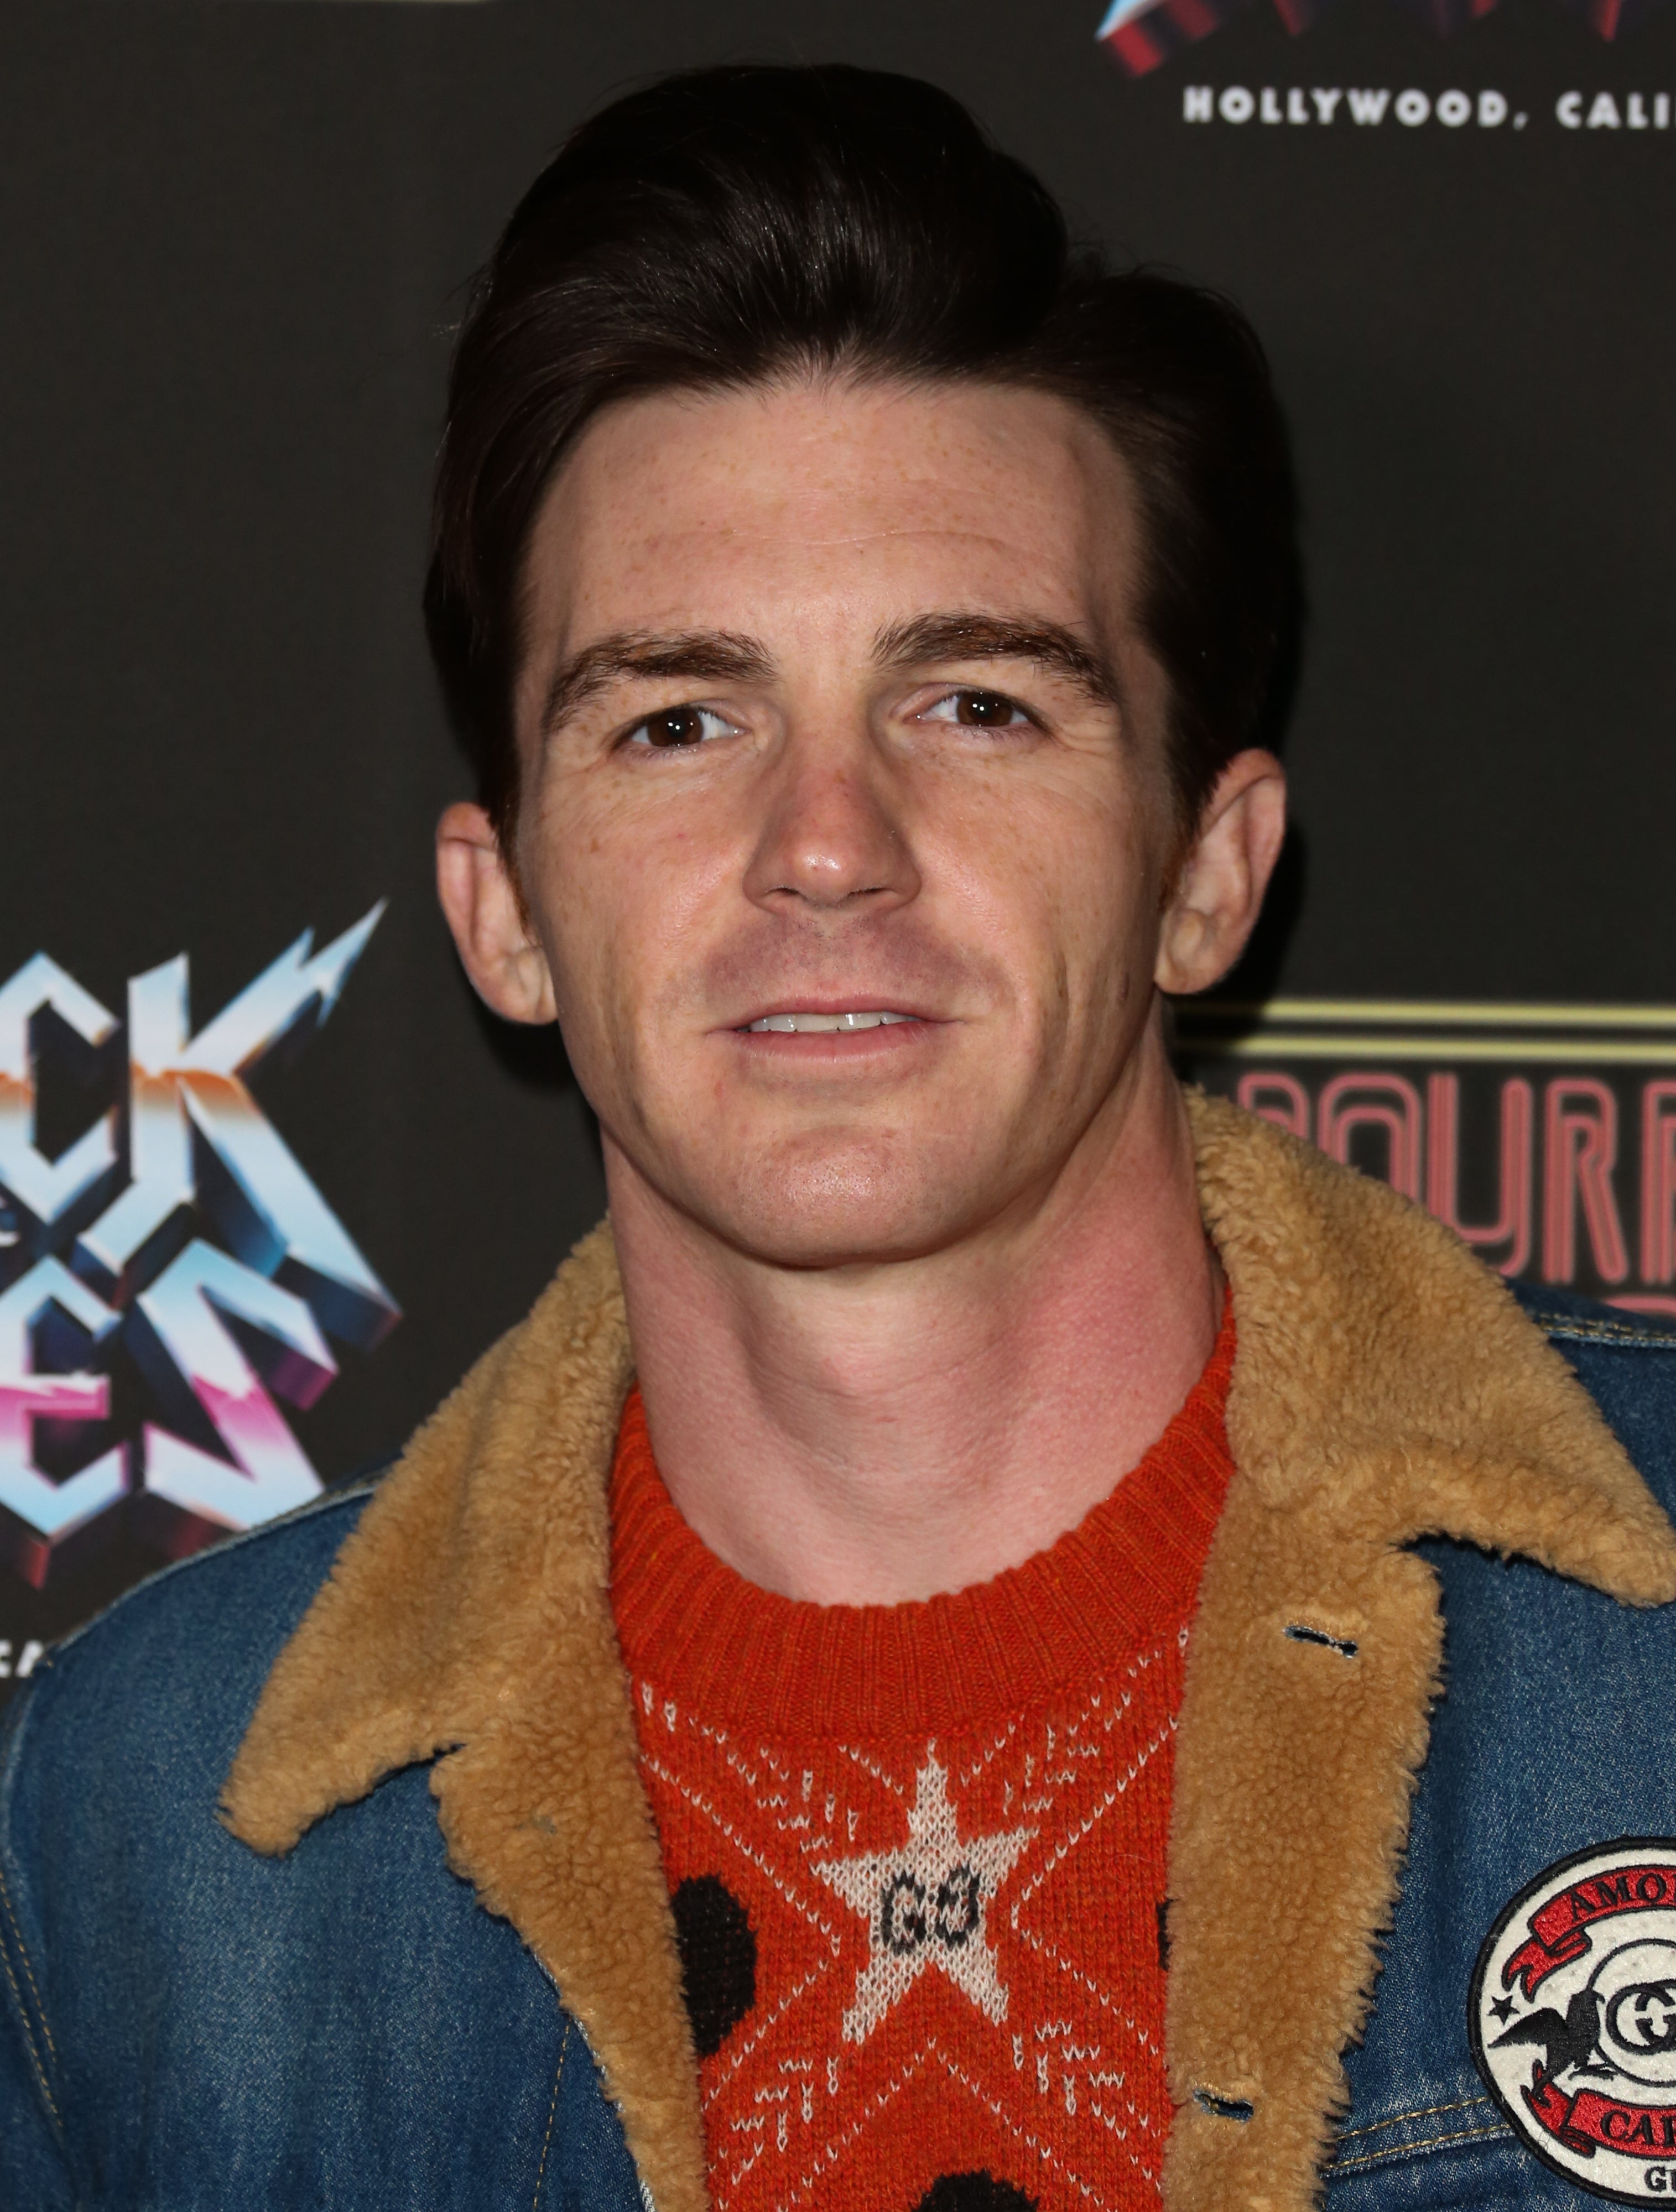 Drake Bell in a denim jacket over a star-patterned shirt, smiling at a &quot;Rock the Vote&quot; event